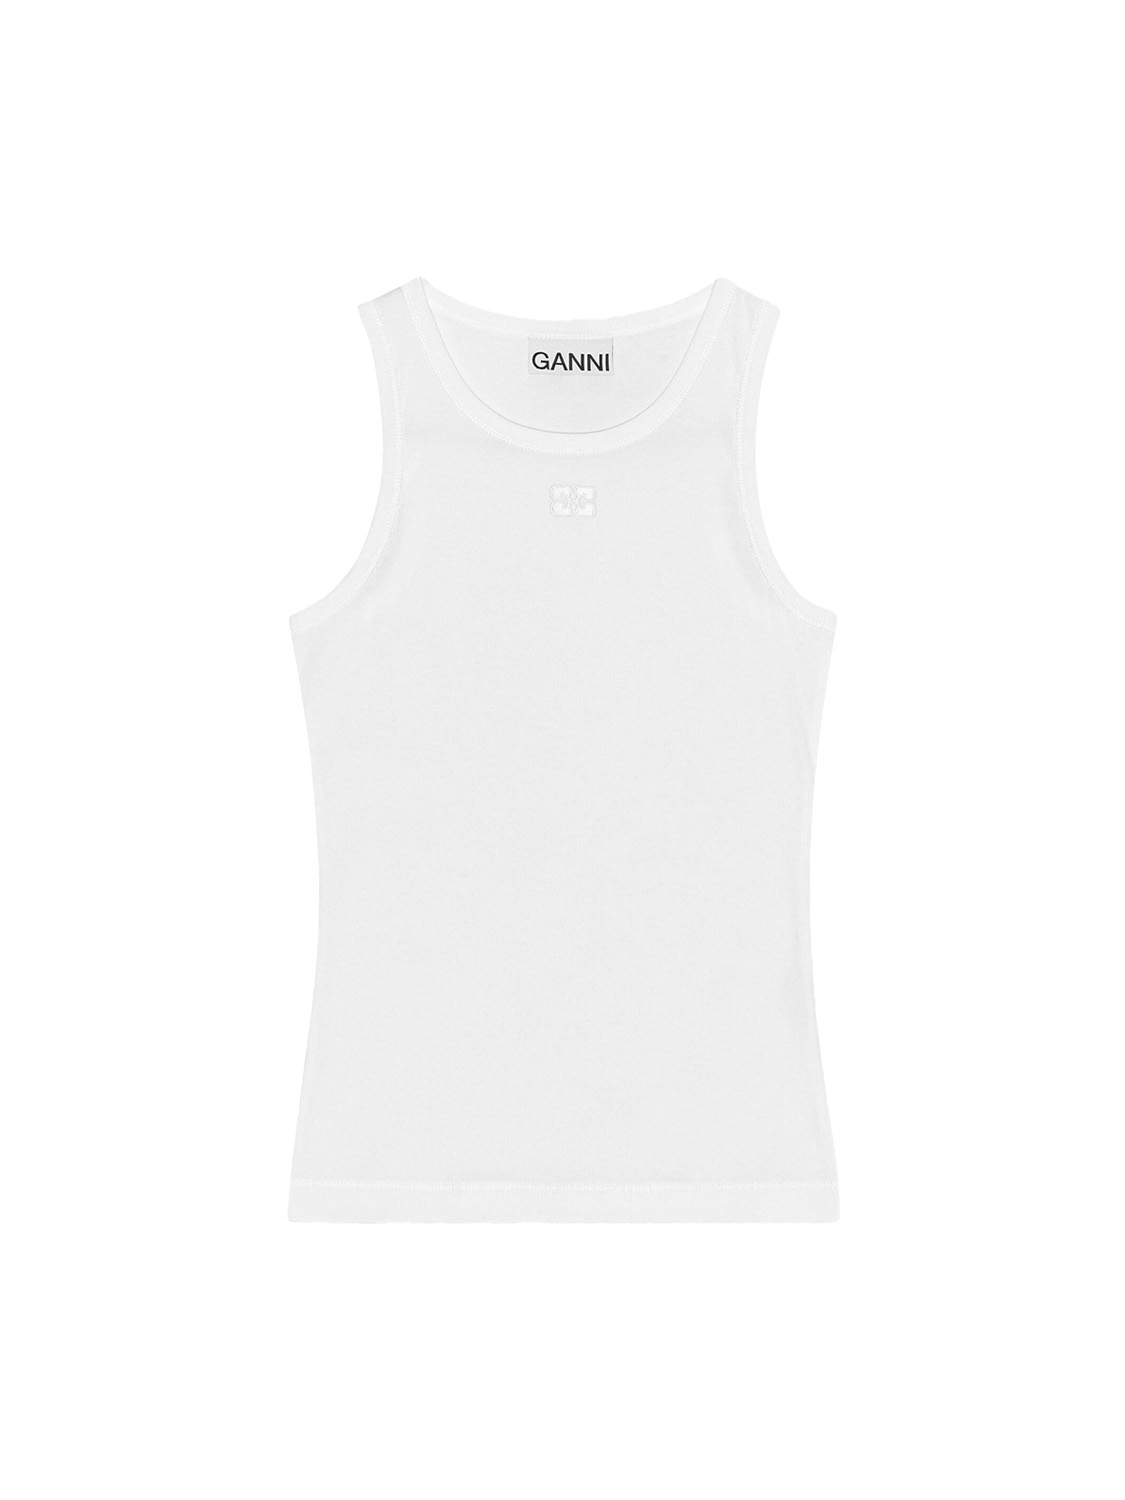 Rib tank top made from soft cotton 